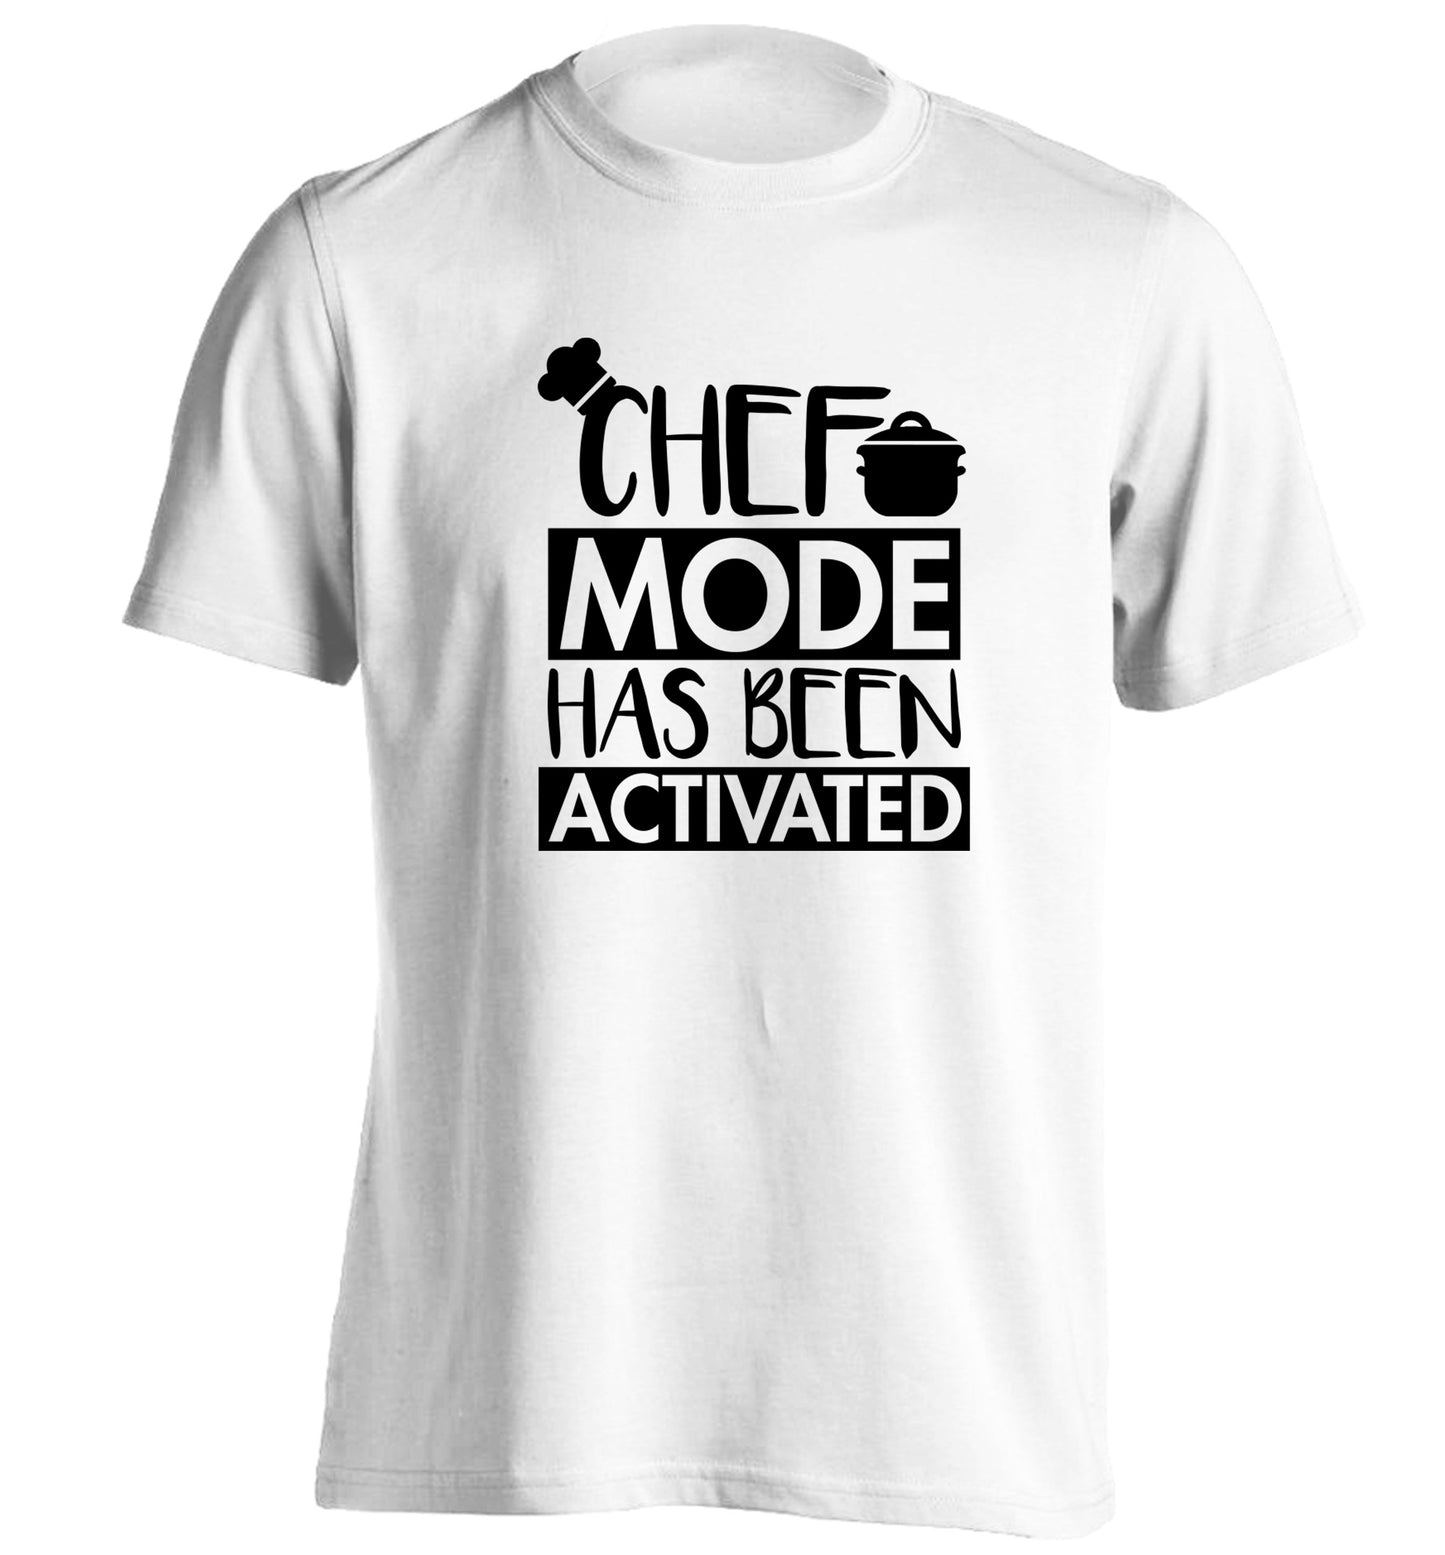 Chef mode has been activated adults unisex white Tshirt 2XL